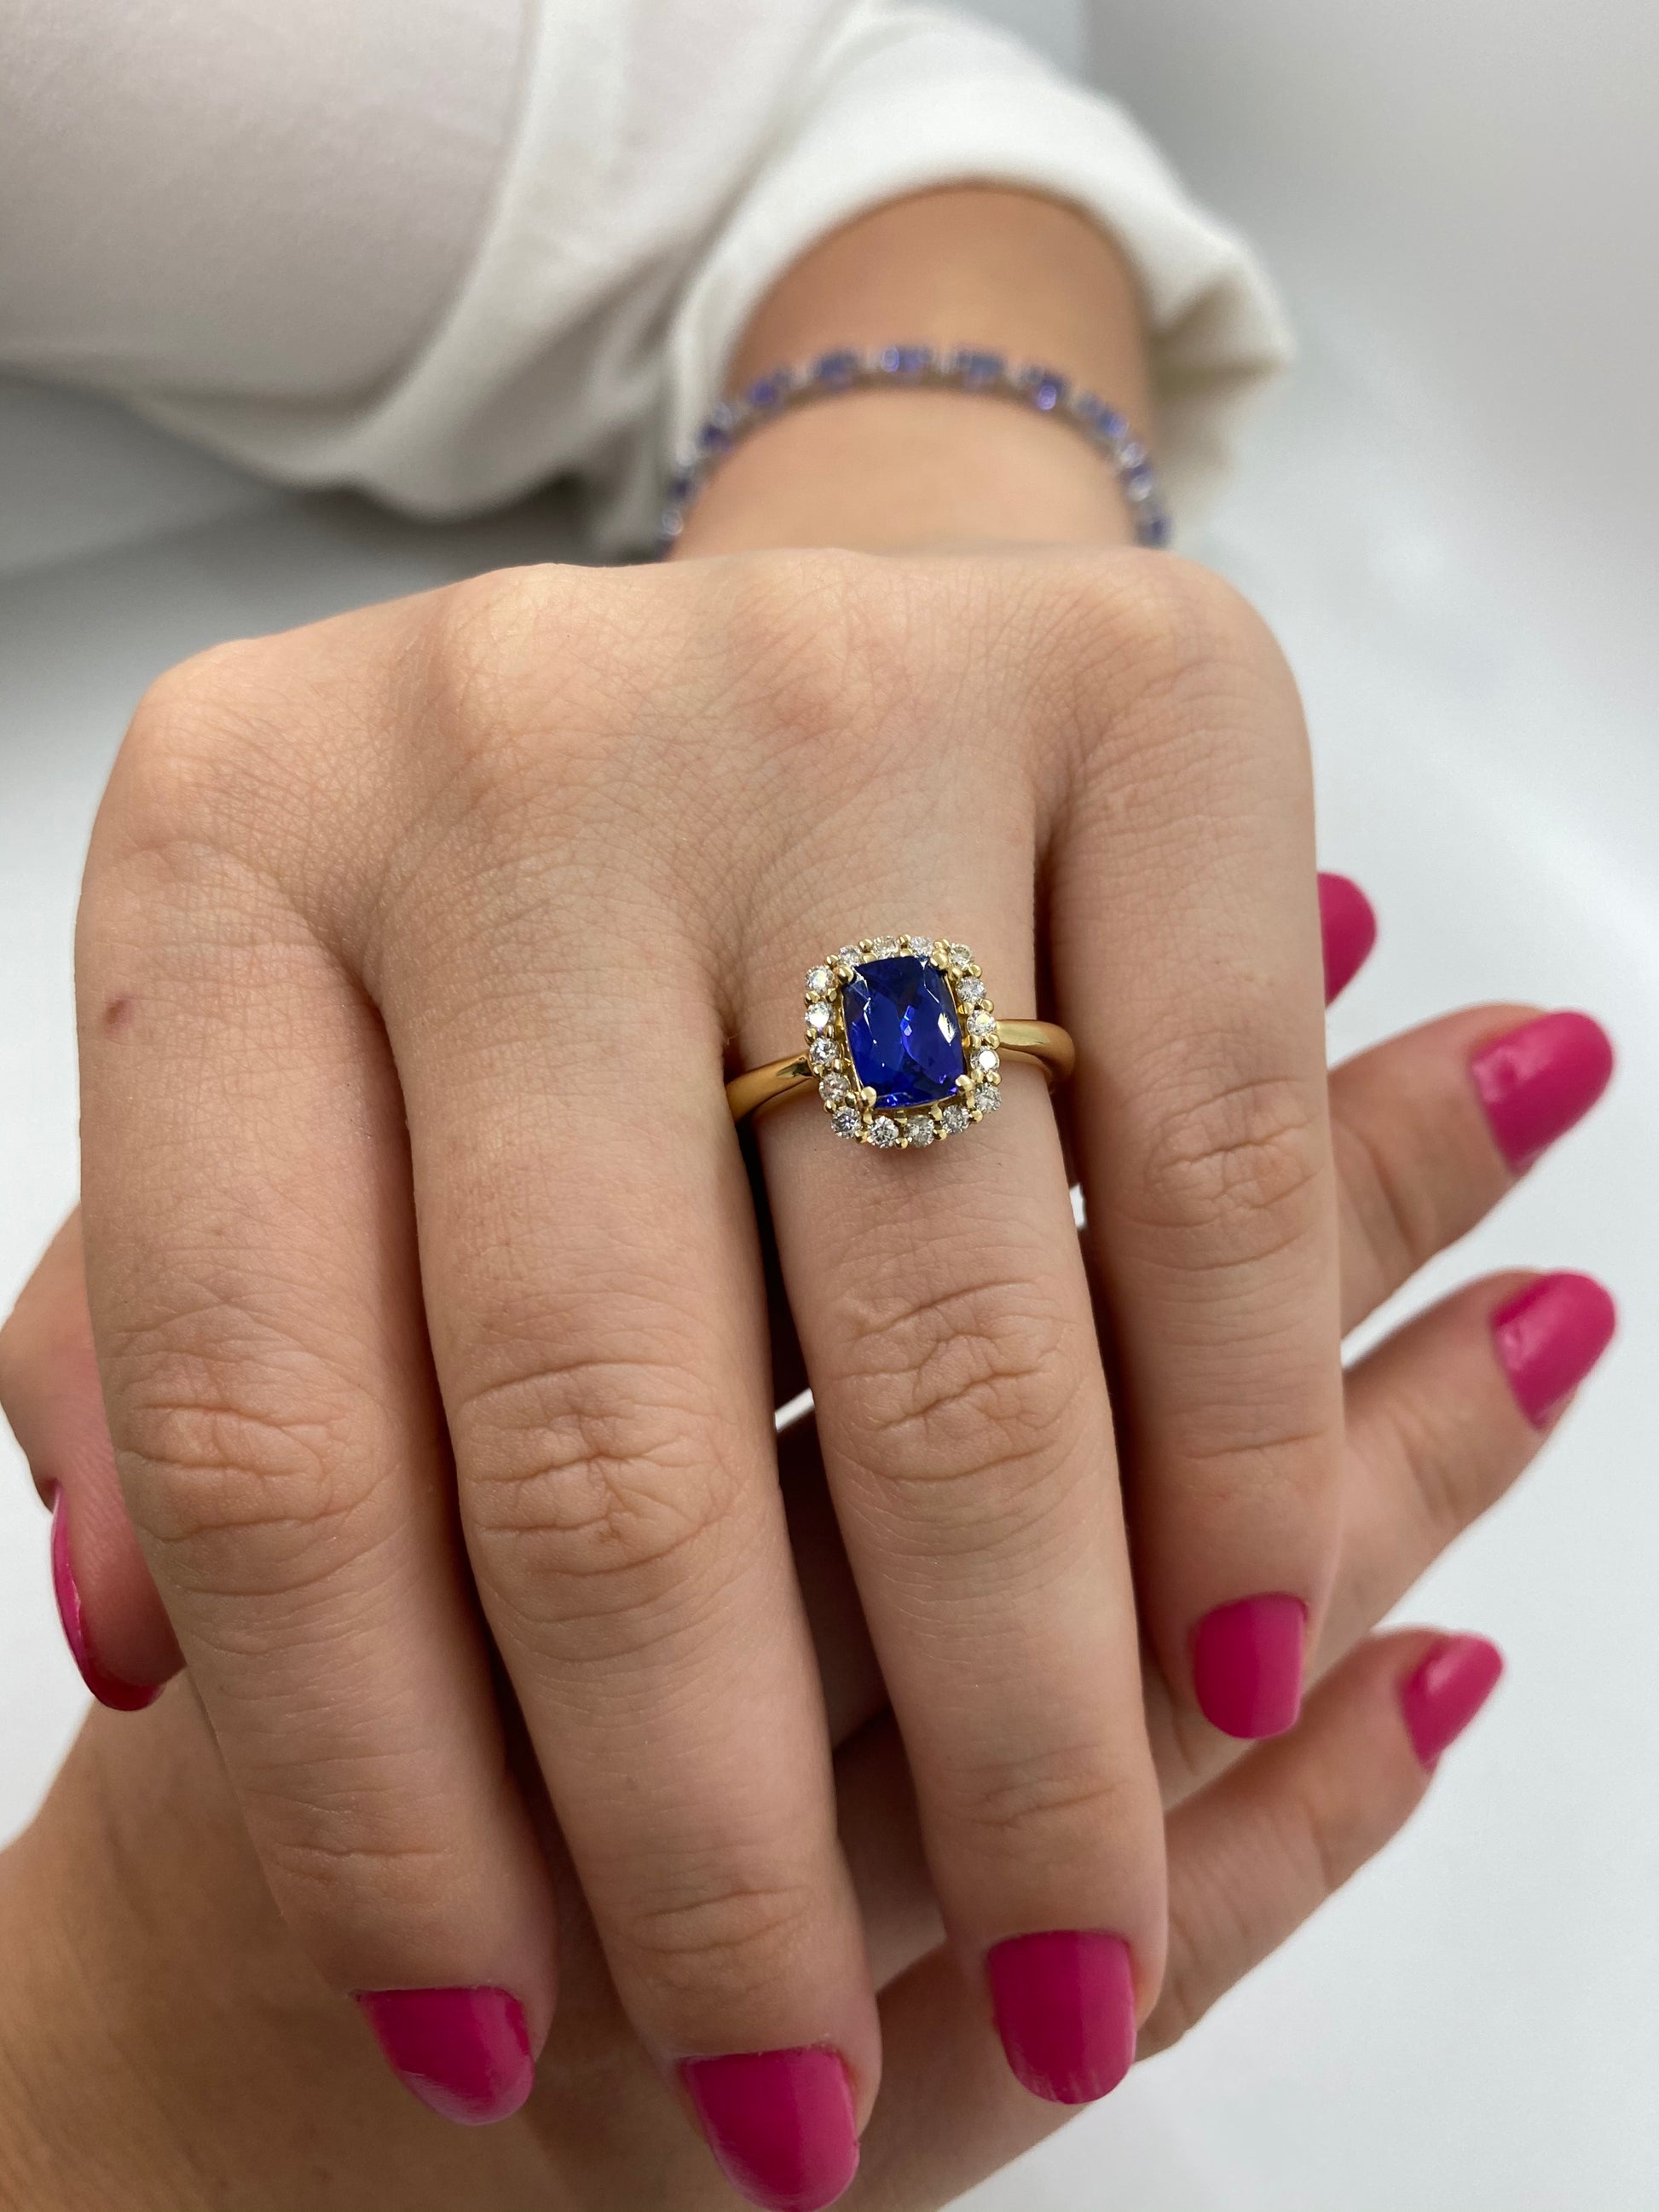 Tanzanite Ring R18697 - Royal Gems and Jewelry